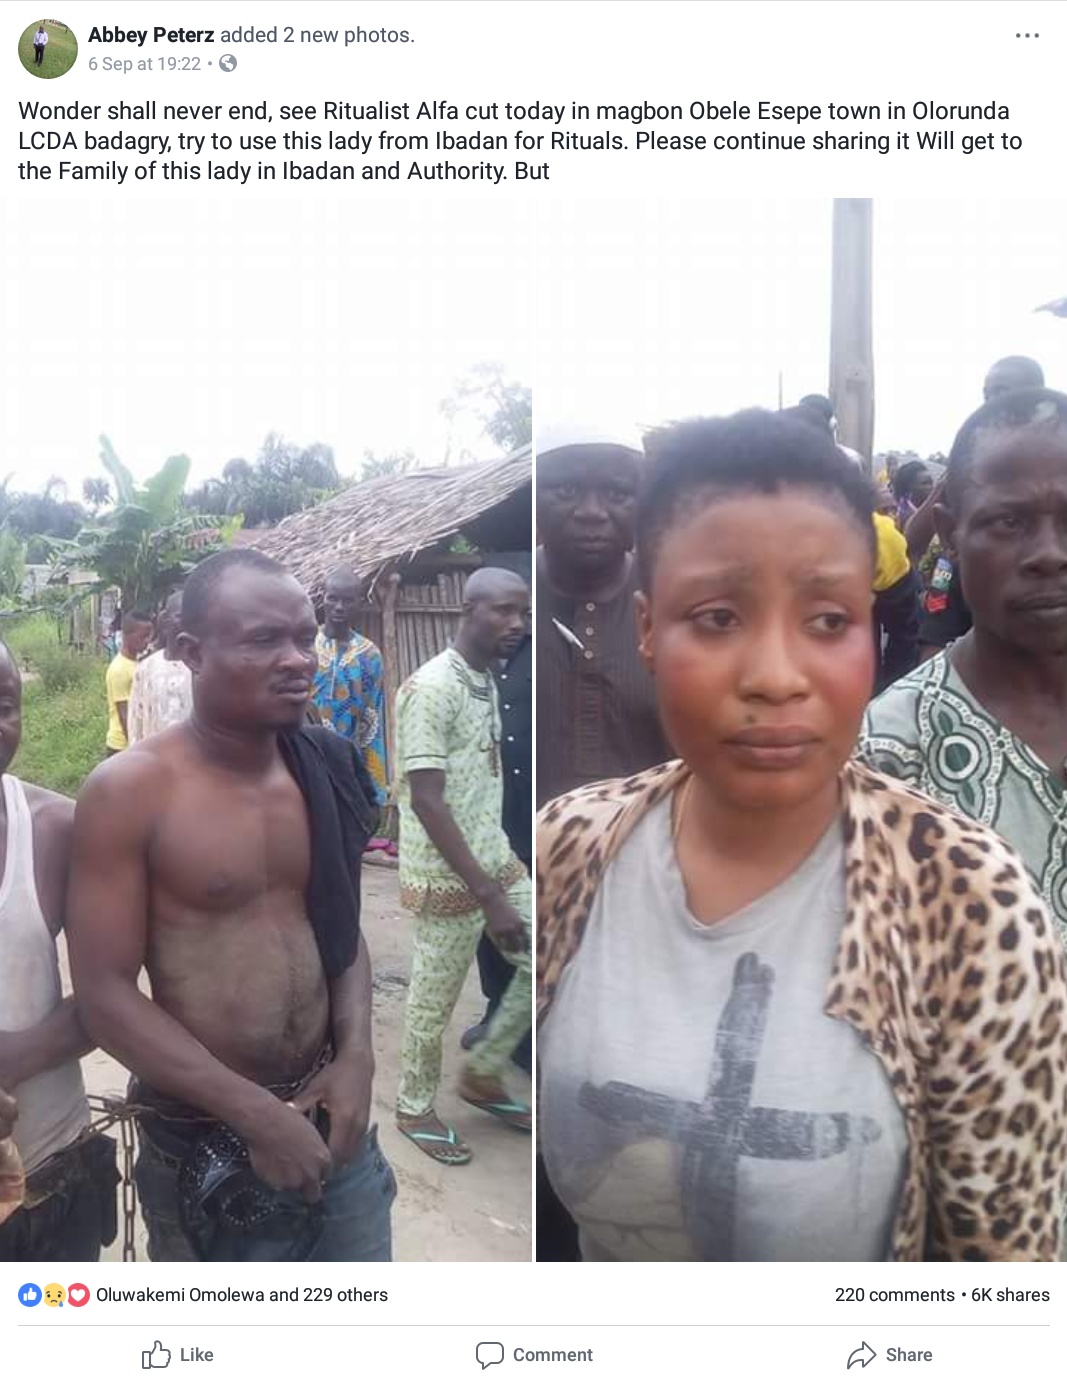 Alfa Was Caught While Trying To Use Woman For Rituals In Lagos